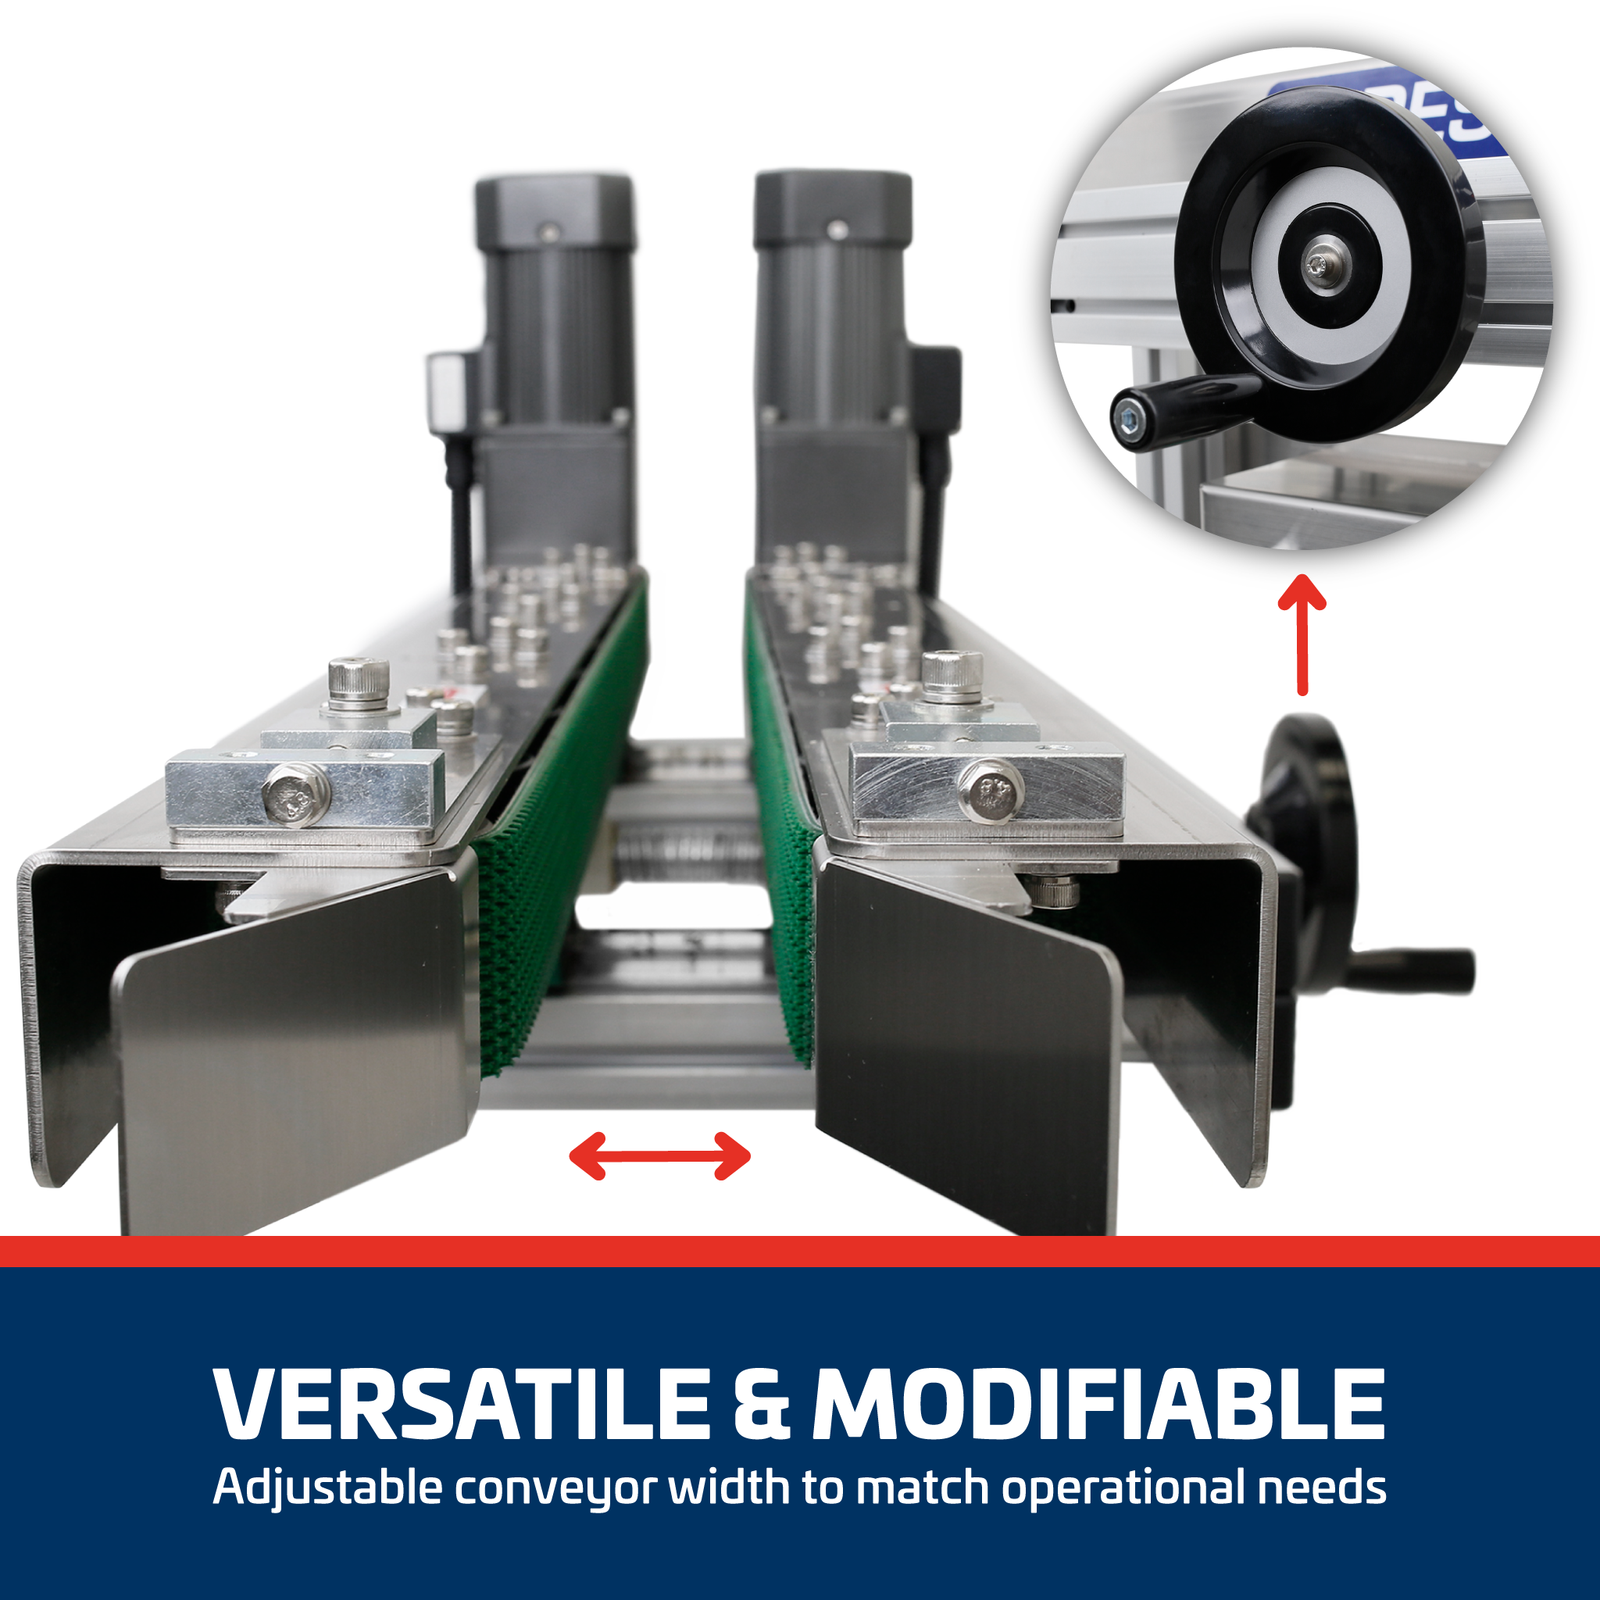 Close up shows the two green side belts of the JORES TECHNOLOGIES® bottomless conveyor that would hold and transport the containers. Banner reads: Versatile and modifiable, adjustable conveyor width to match operational needs